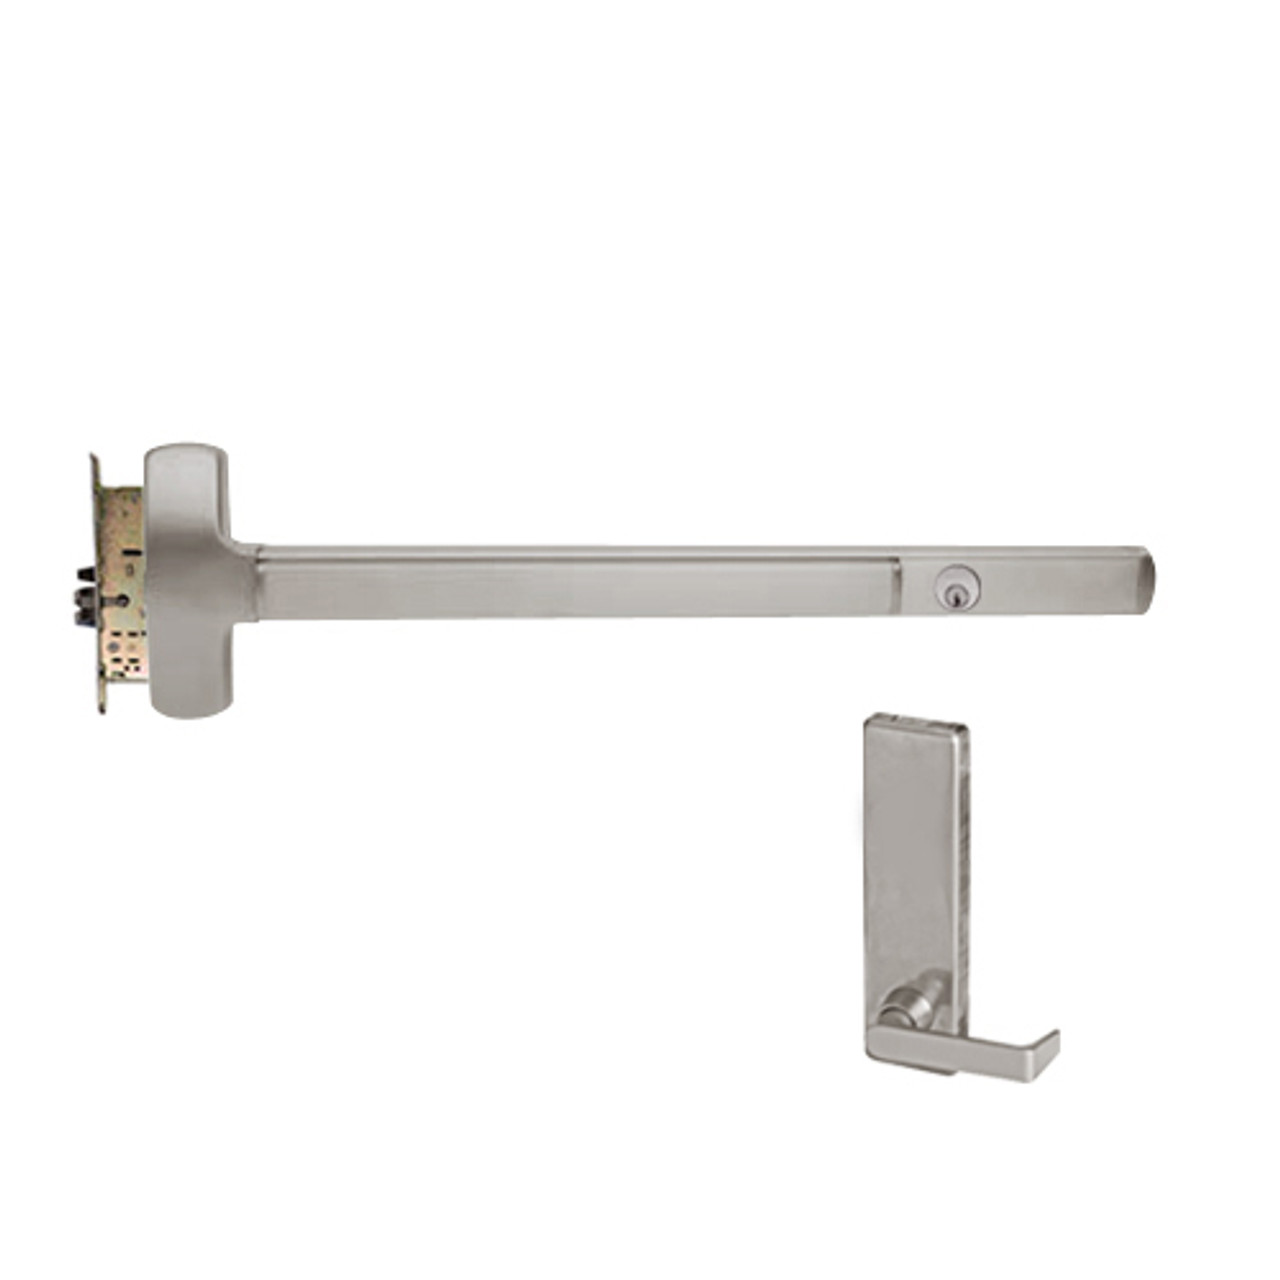 CD25-M-L-BE-DANE-US32D-4-LHR Falcon Exit Device in Satin Stainless Steel